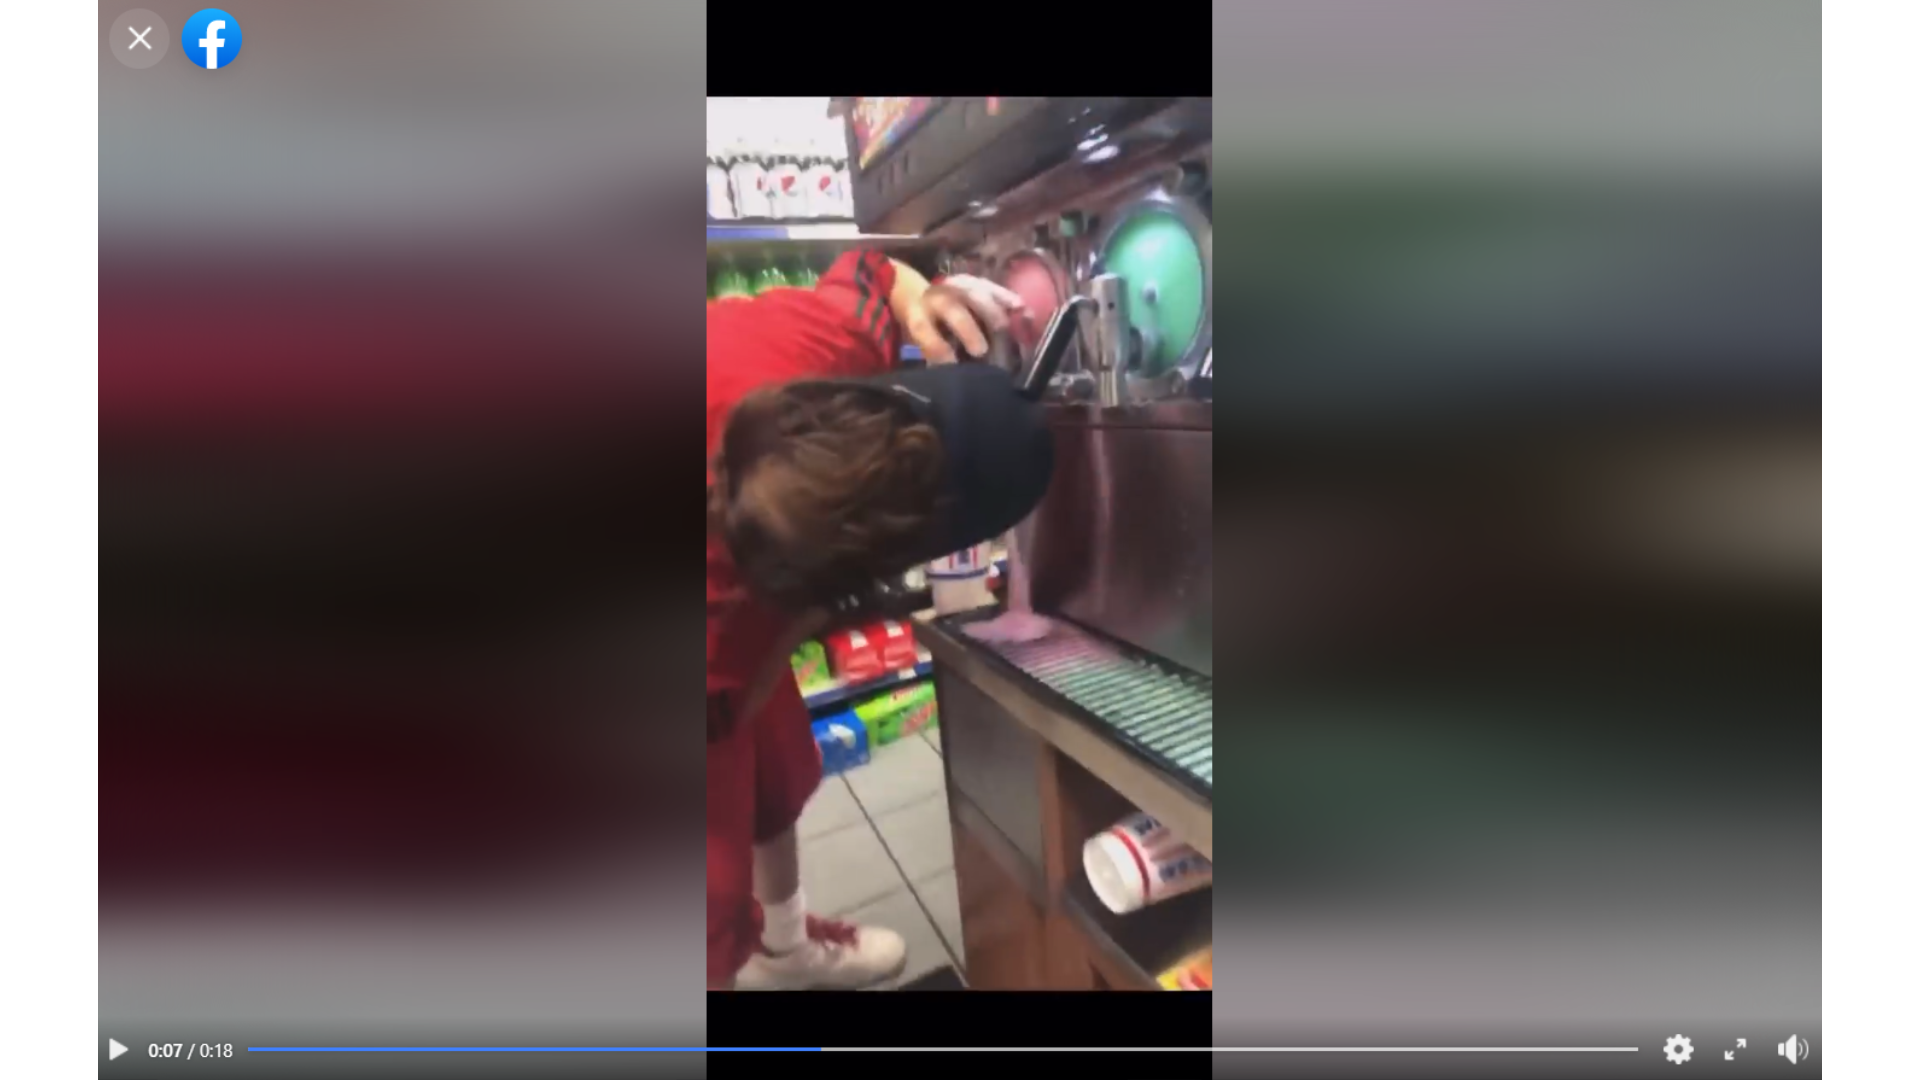 Man gets banned from Muskegon Wesco after putting mouth on slushie machine